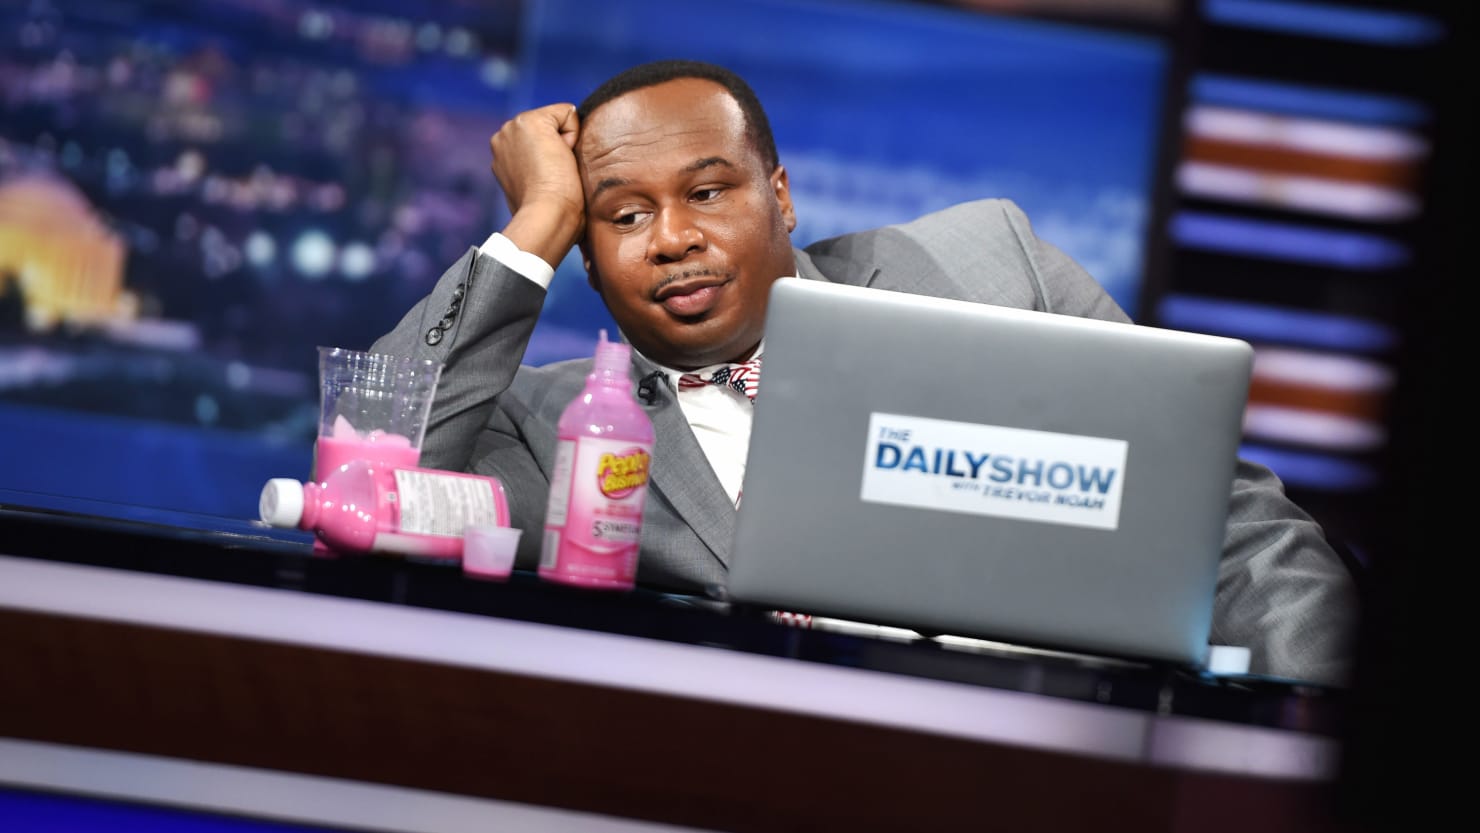 Roy Wood Jr. quits the “Daily Show” after losing the host gig